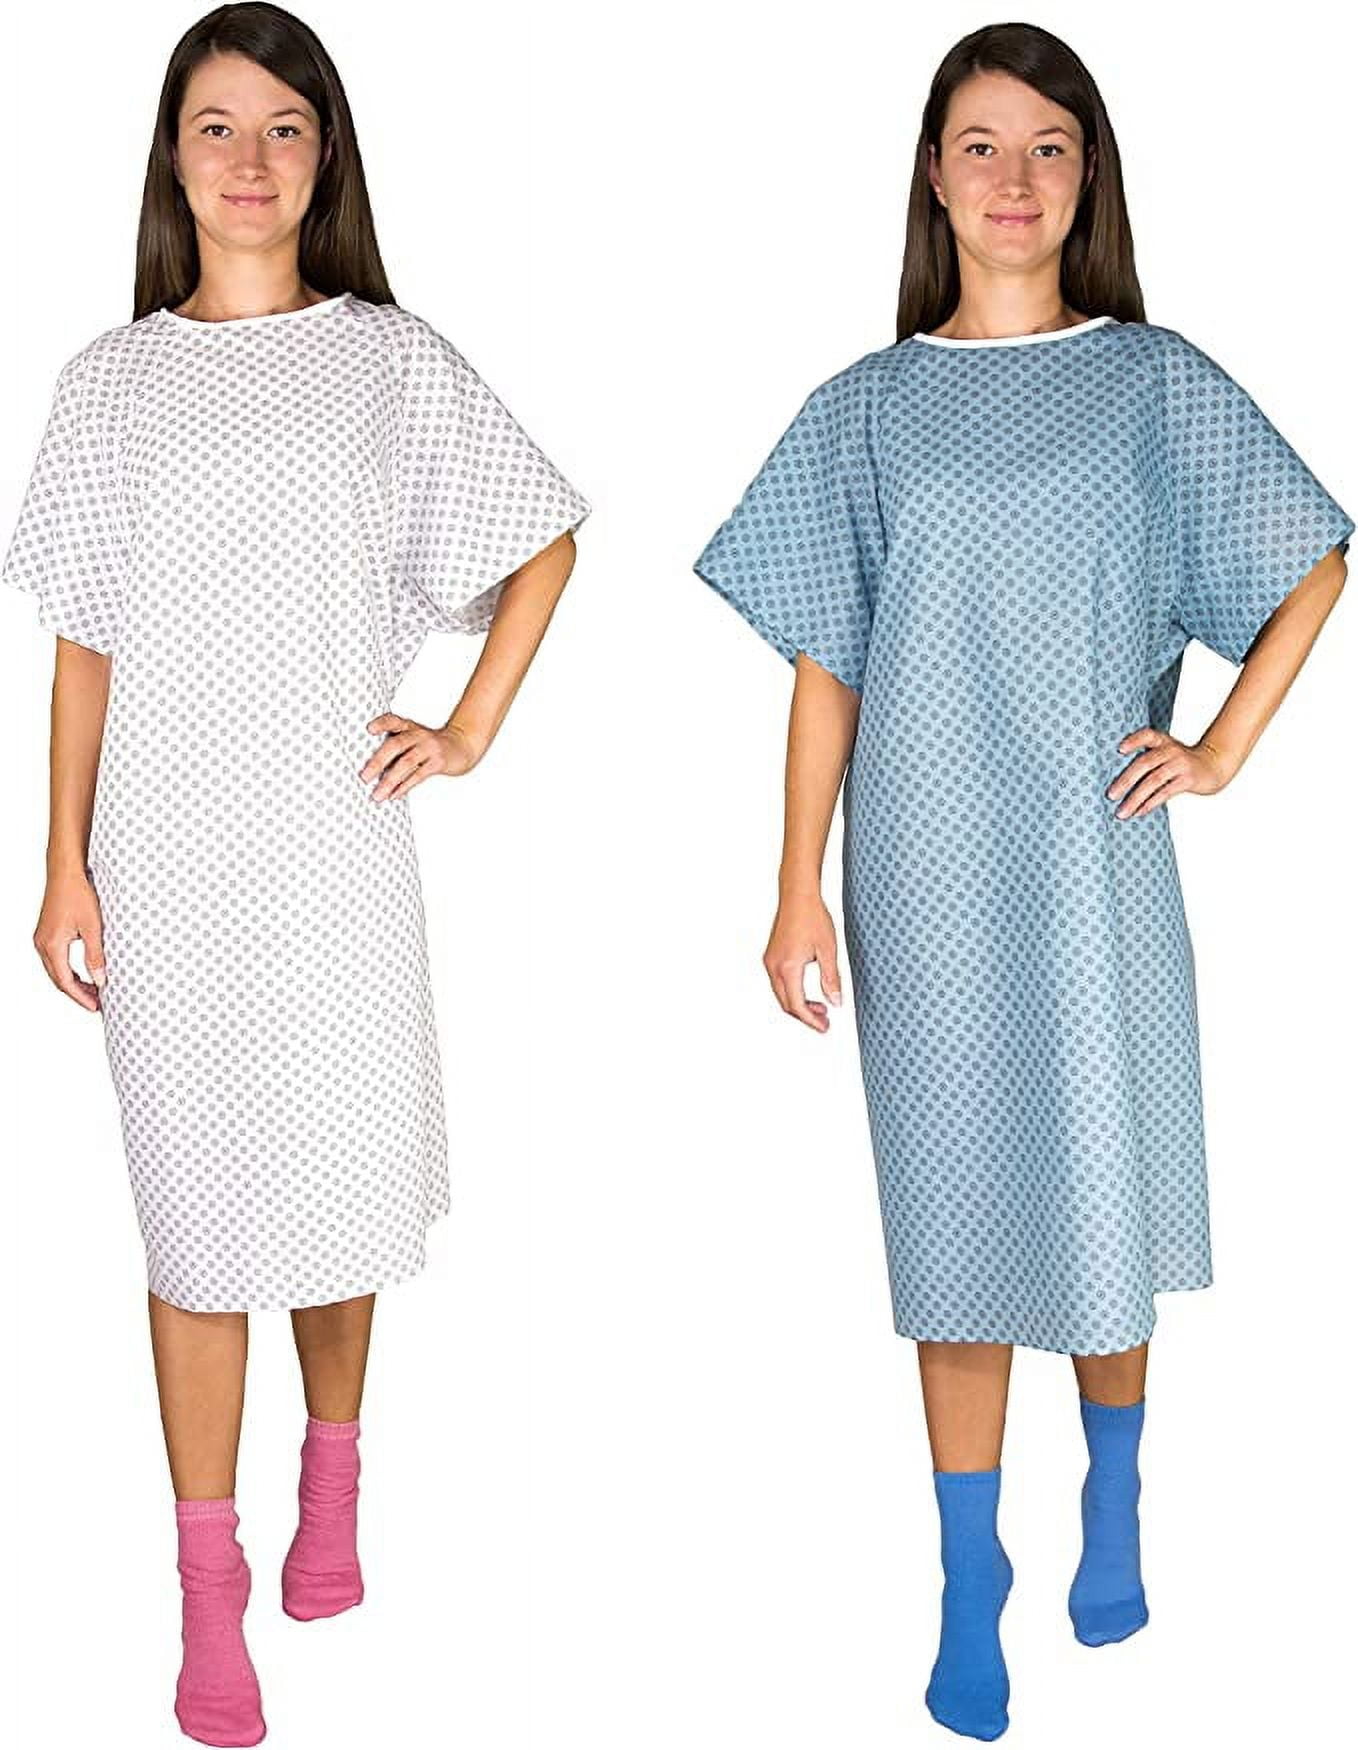 New Hospital Gowns Provide Enhanced Coverage